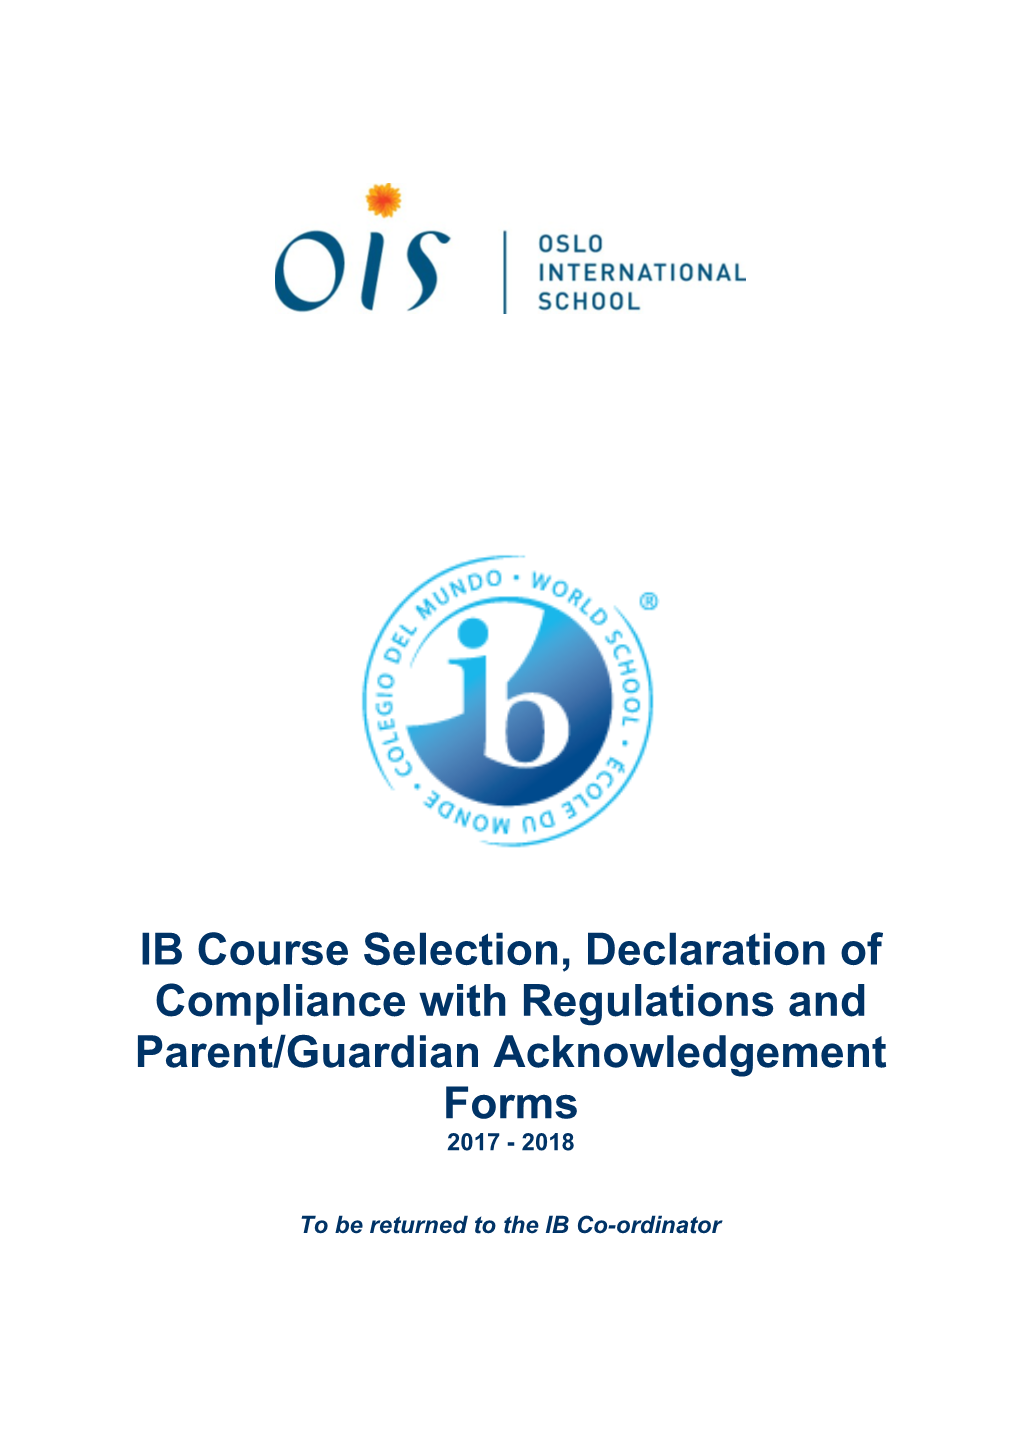 IB Course Selection, Declaration of Compliance with Regulations and Parent/Guardian